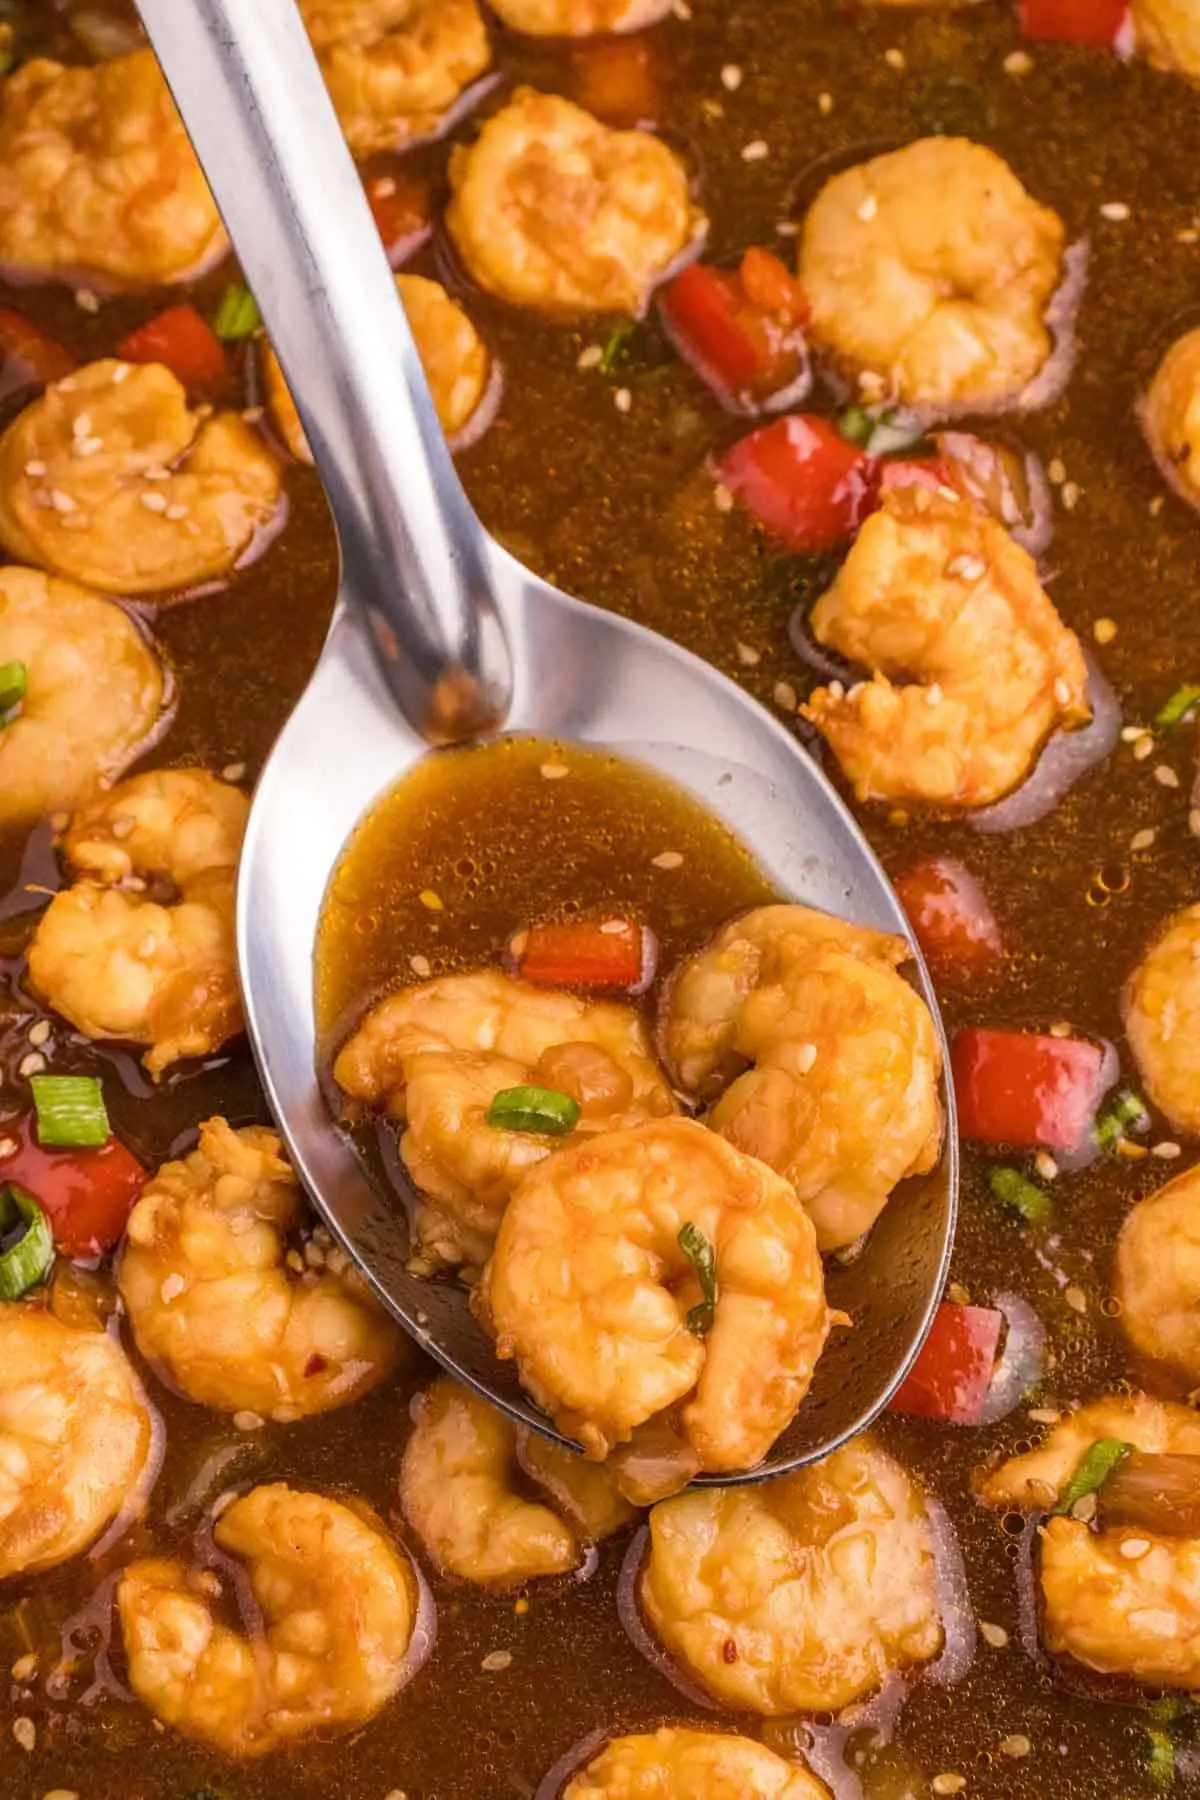 Mongolian Shrimp is a delightful dish with large shrimp cooked in a rich seasoned soy sauce with a bit of a kick from the addition of some chili garlic sauce.